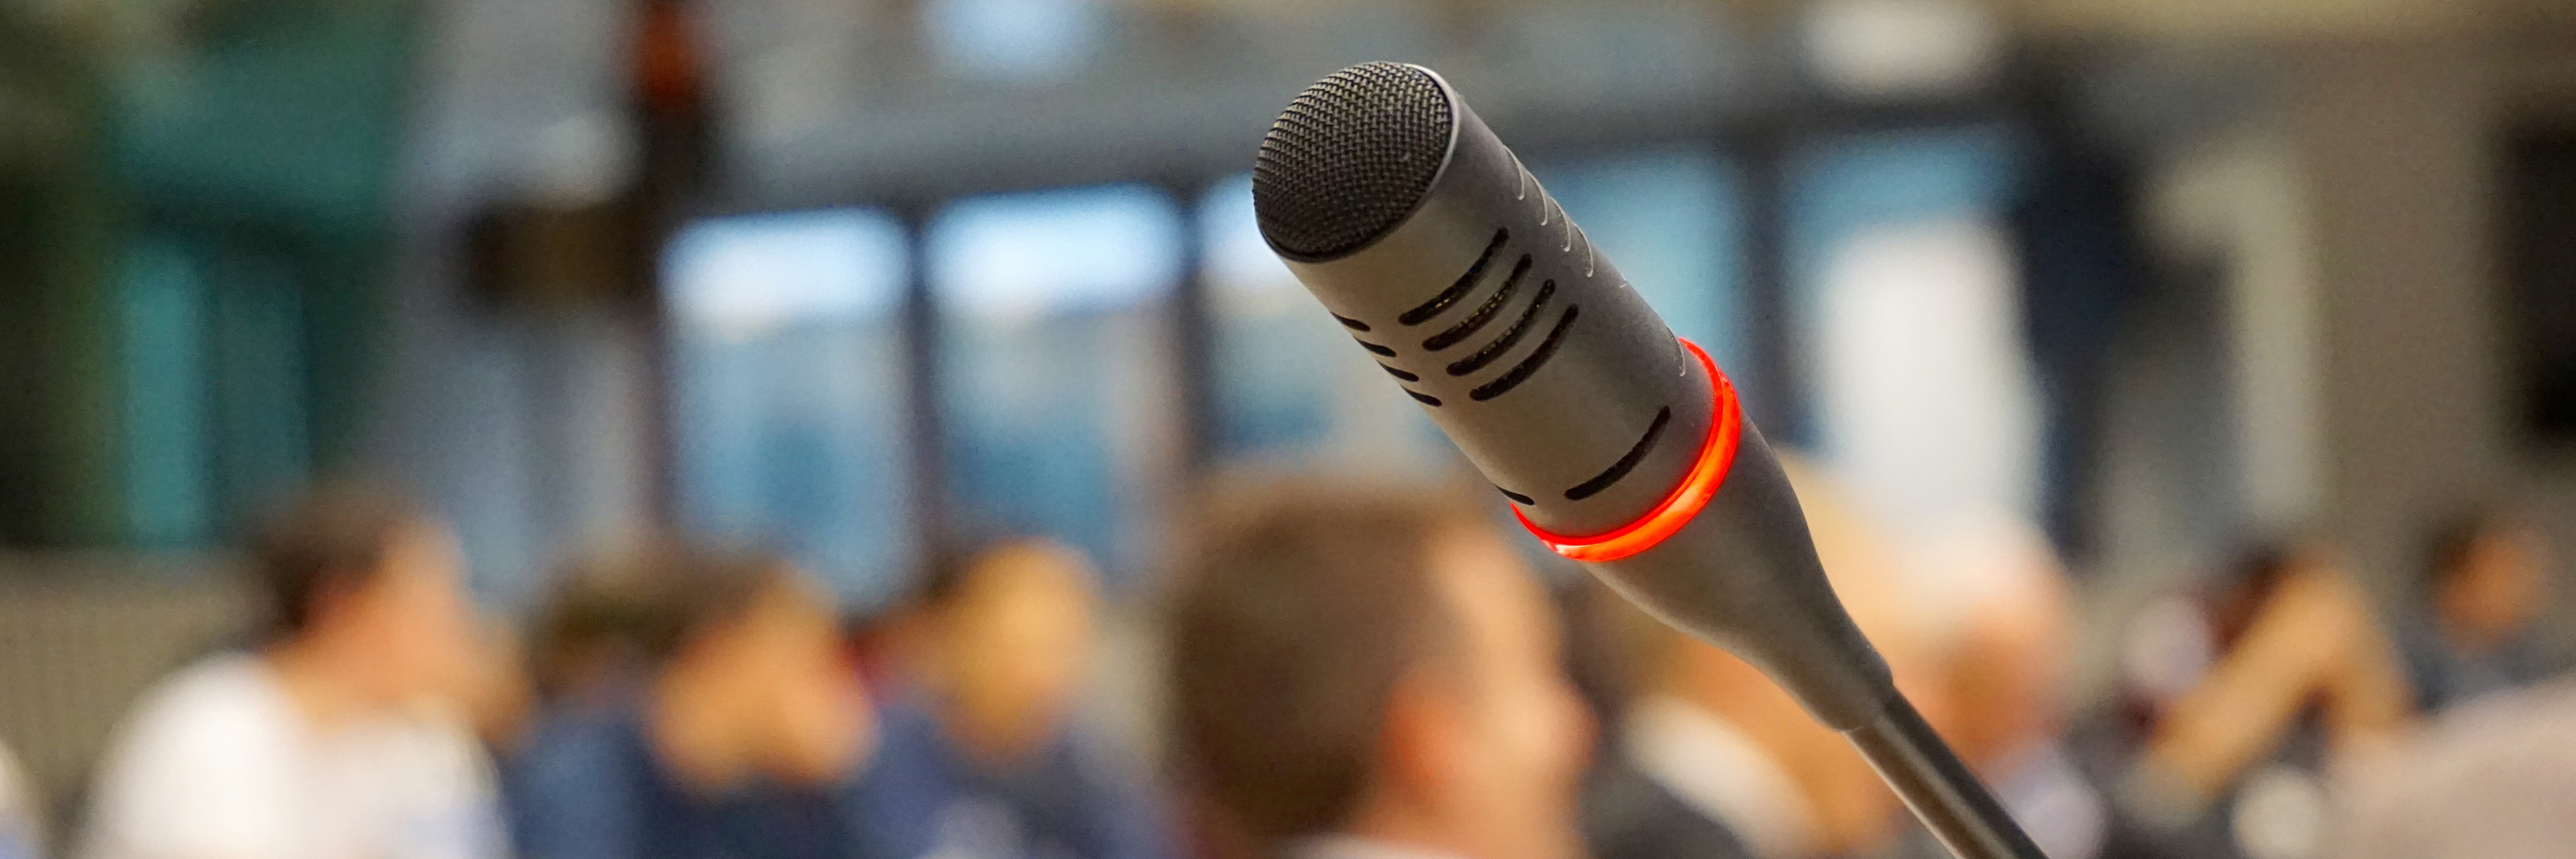 Podium microphone at an event